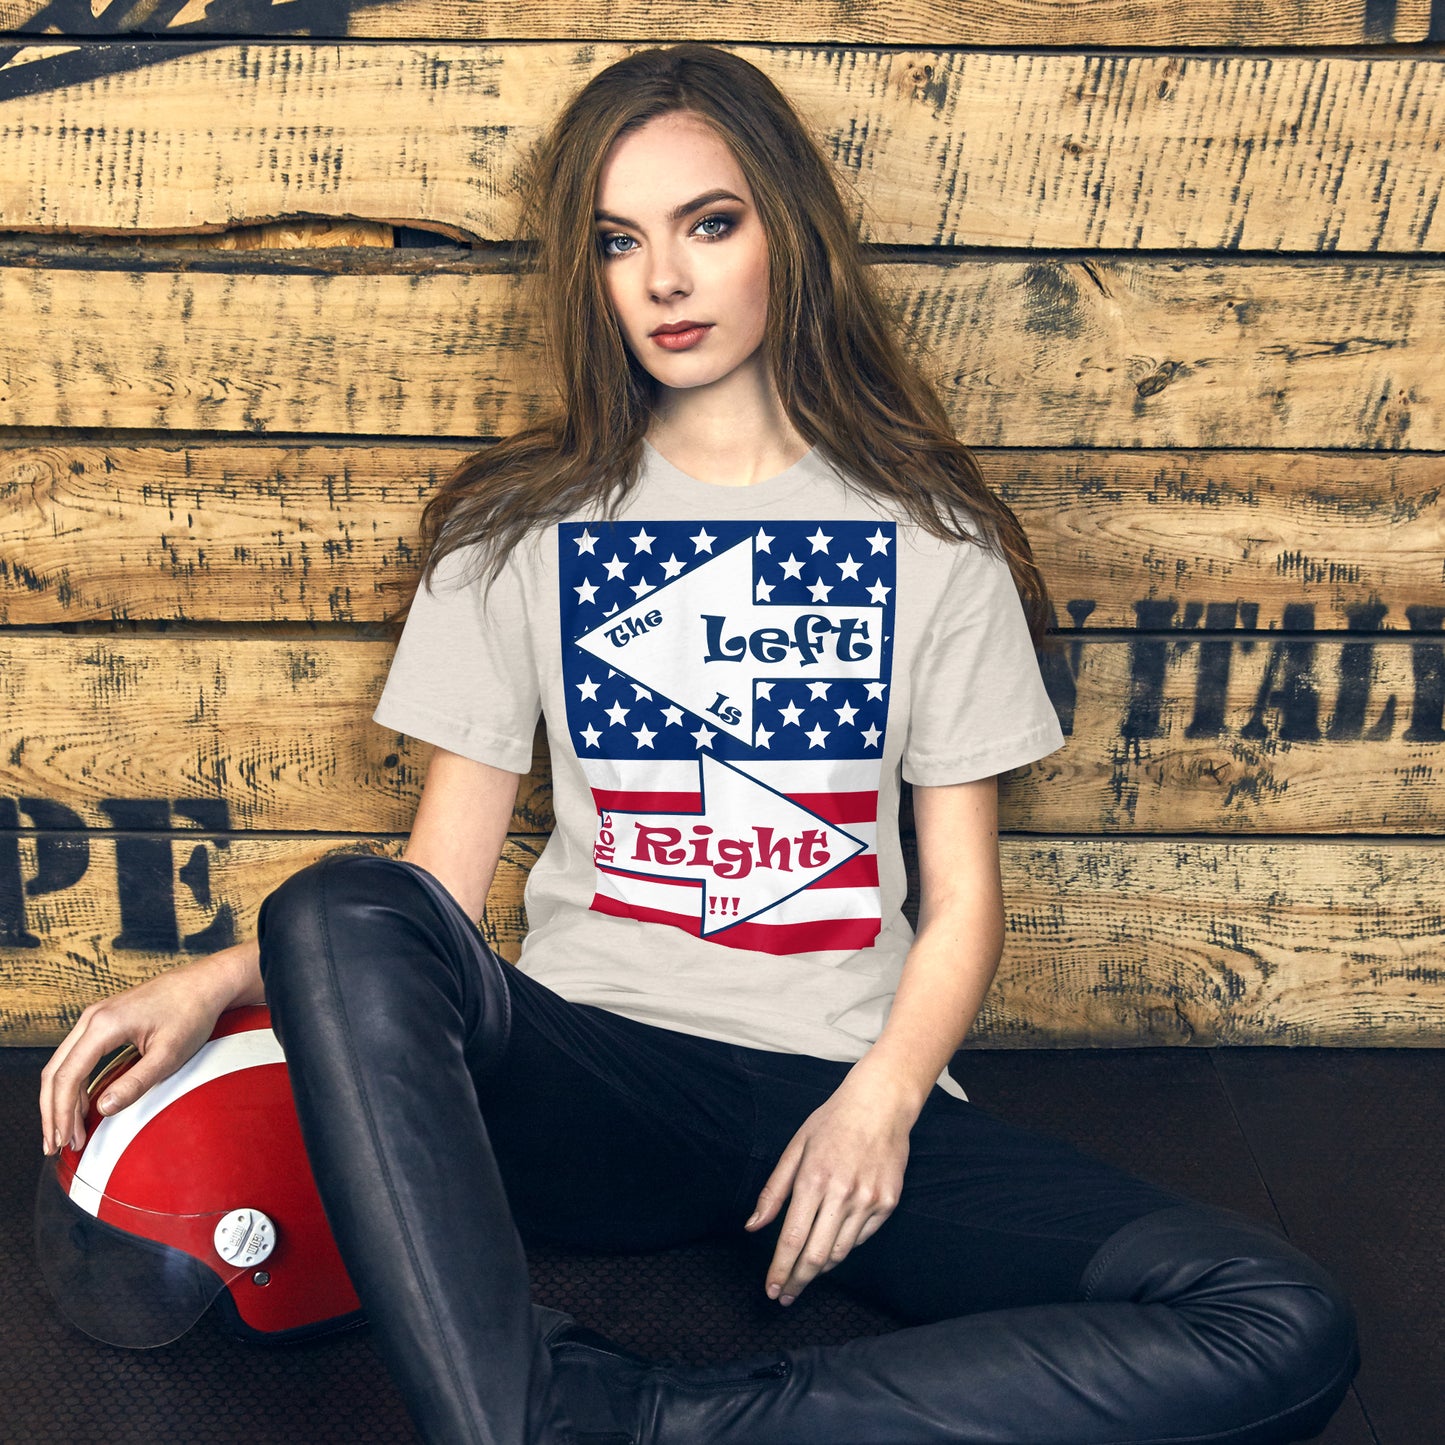 A017 T-shirt - Bella + Canvas 3001 Unisex T-shirt Featuring the Stars and Stripes of the U S Flag with the Text “The Left Is Not Right.”